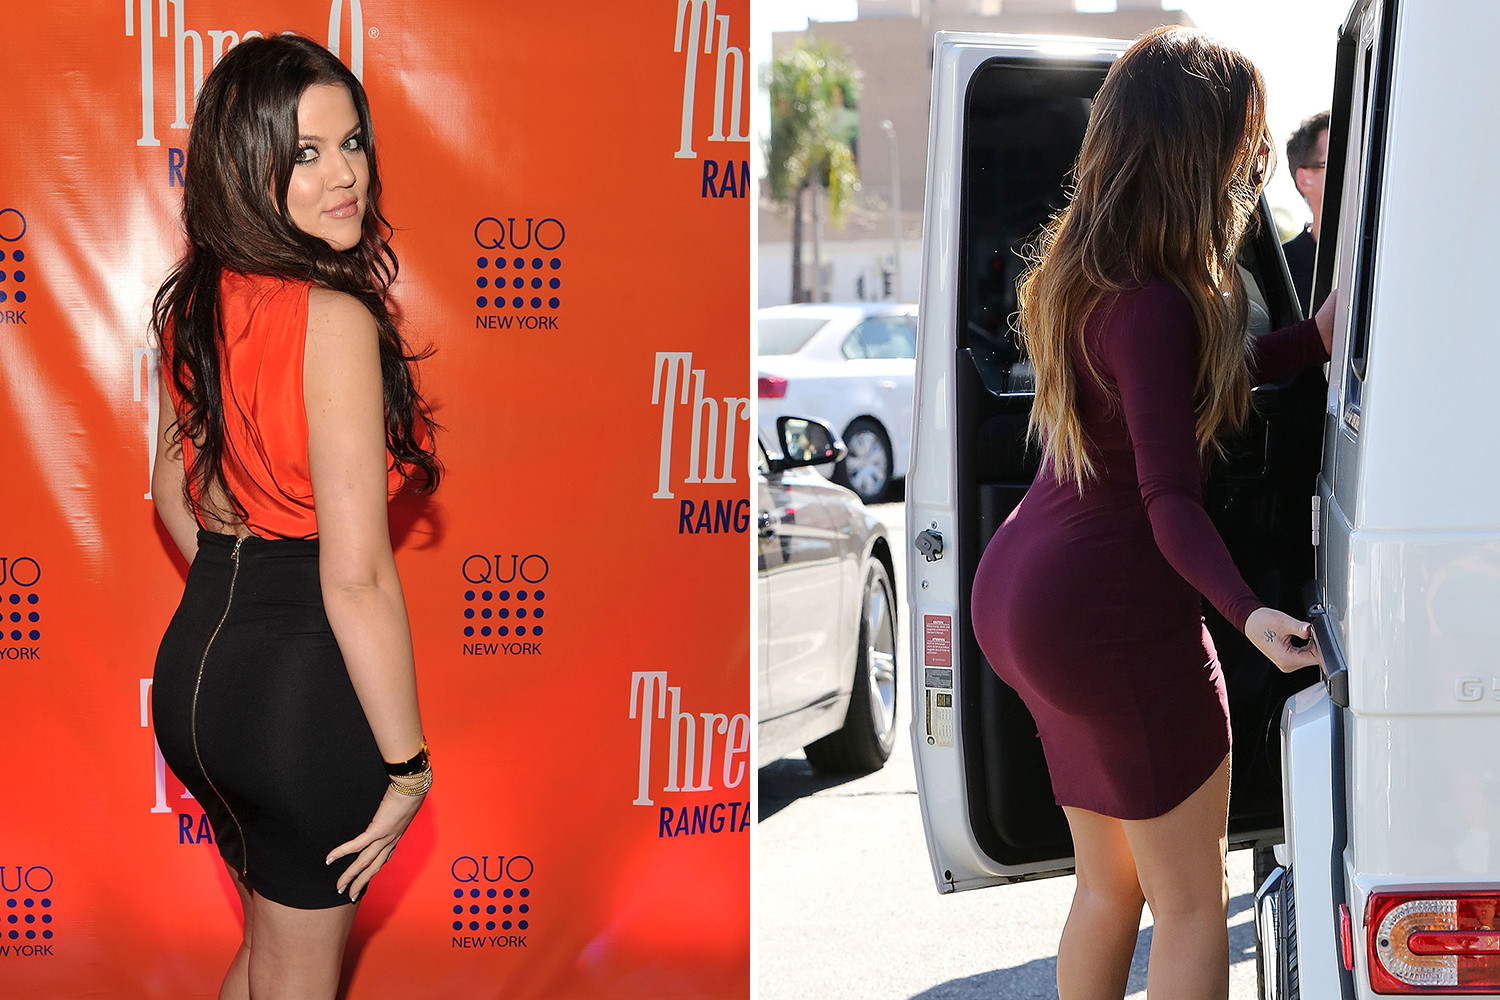 Exercise or implants? Just how did Khloe Kardashian get her ...